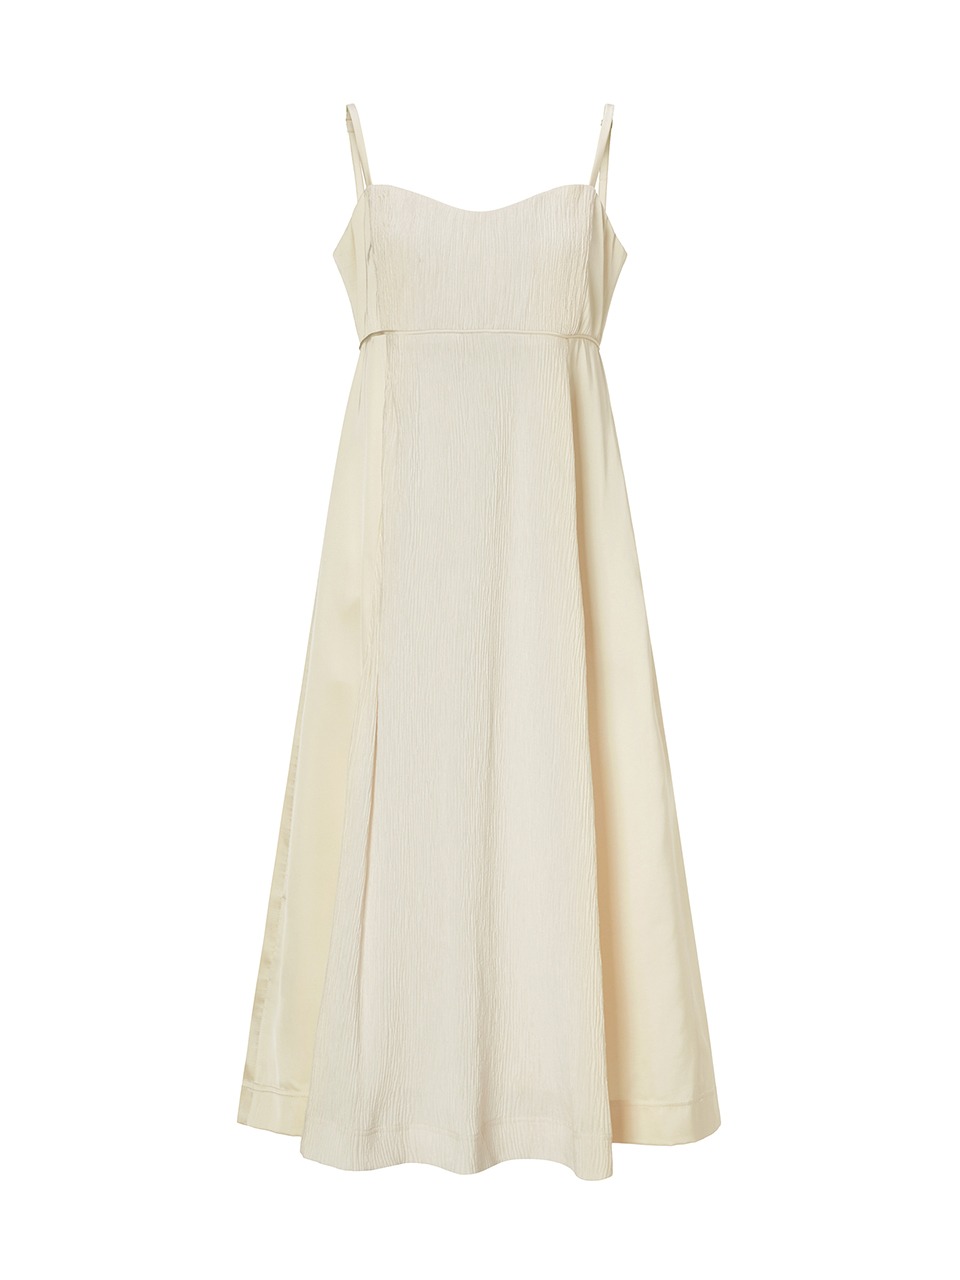 Soie Sleeveless Pleated Dress Ivory Lace